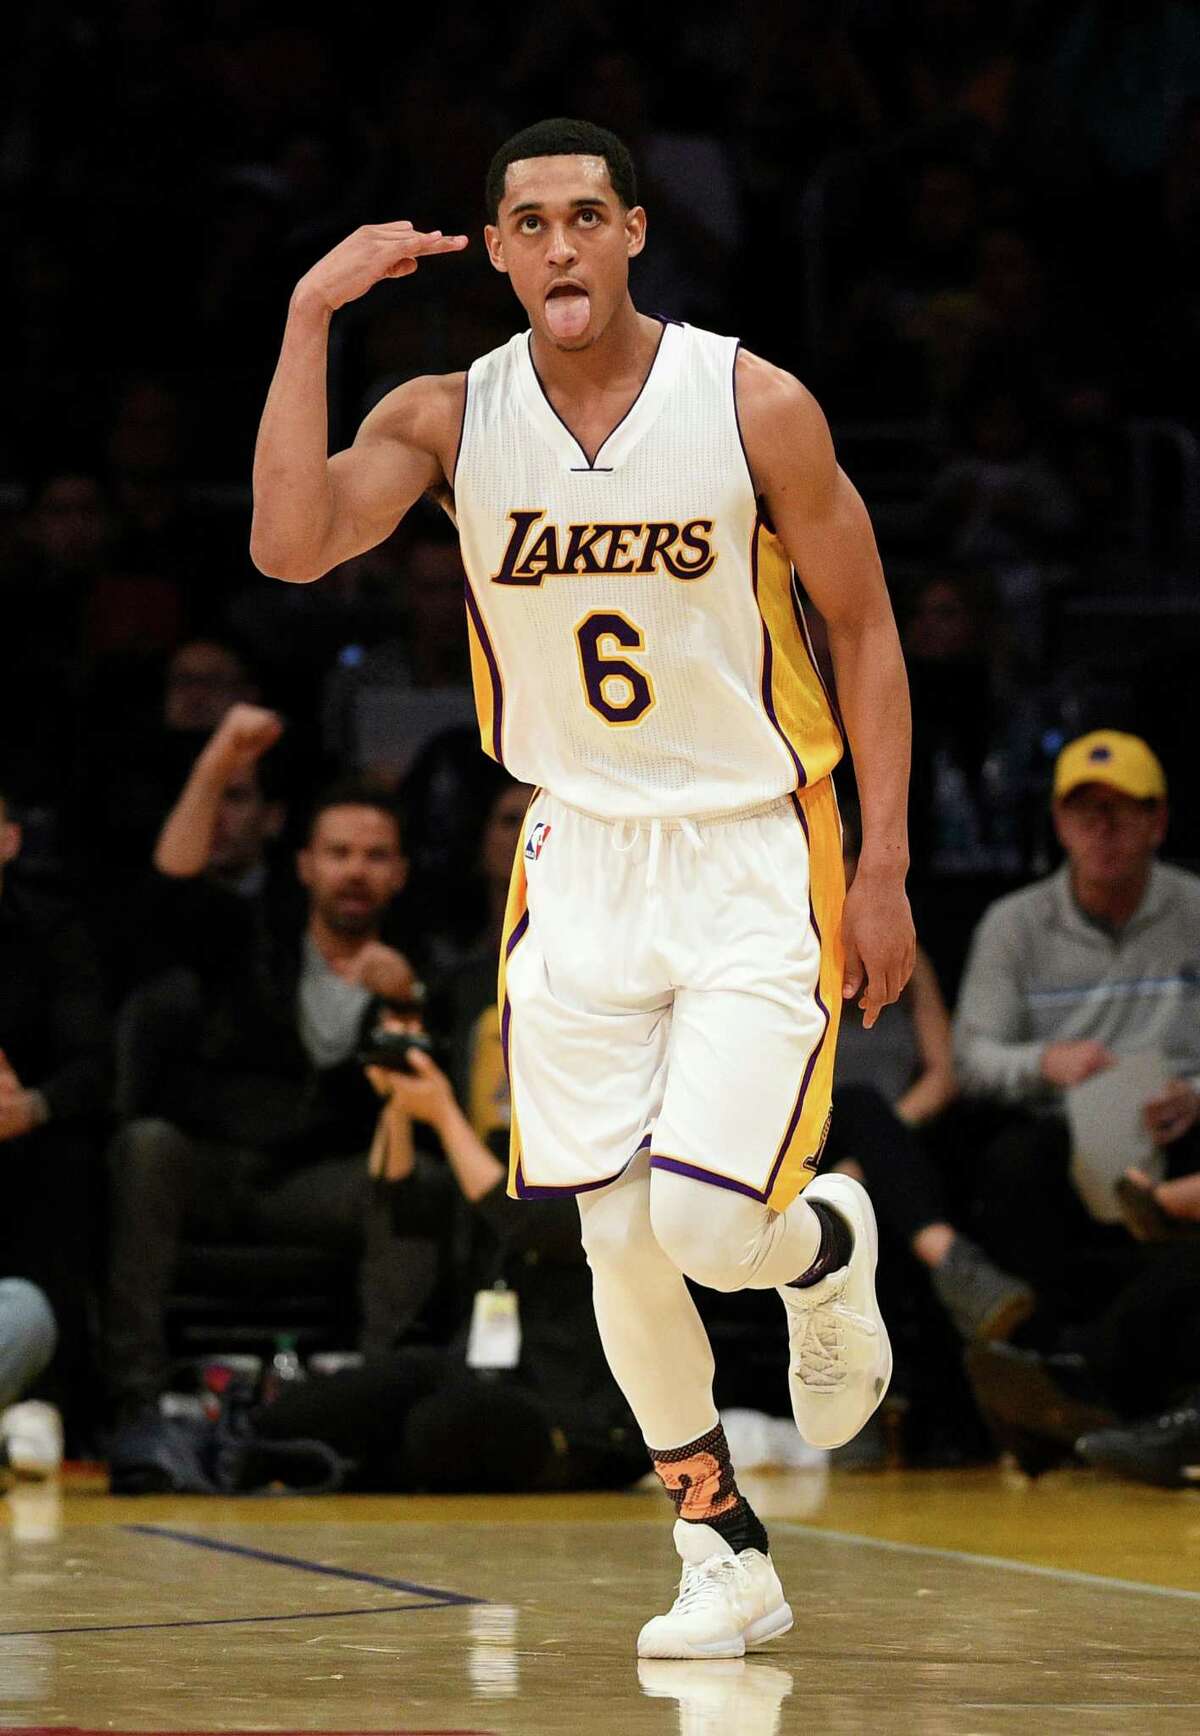 Los Angeles Lakers guard Jordan Clarkson reacts after he makes a three-point shot during the second half of an NBA basketball game against the Golden State Warriors in Los Angeles, Sunday, March 6, 2016. The Los Angeles Lakers won 112-95.